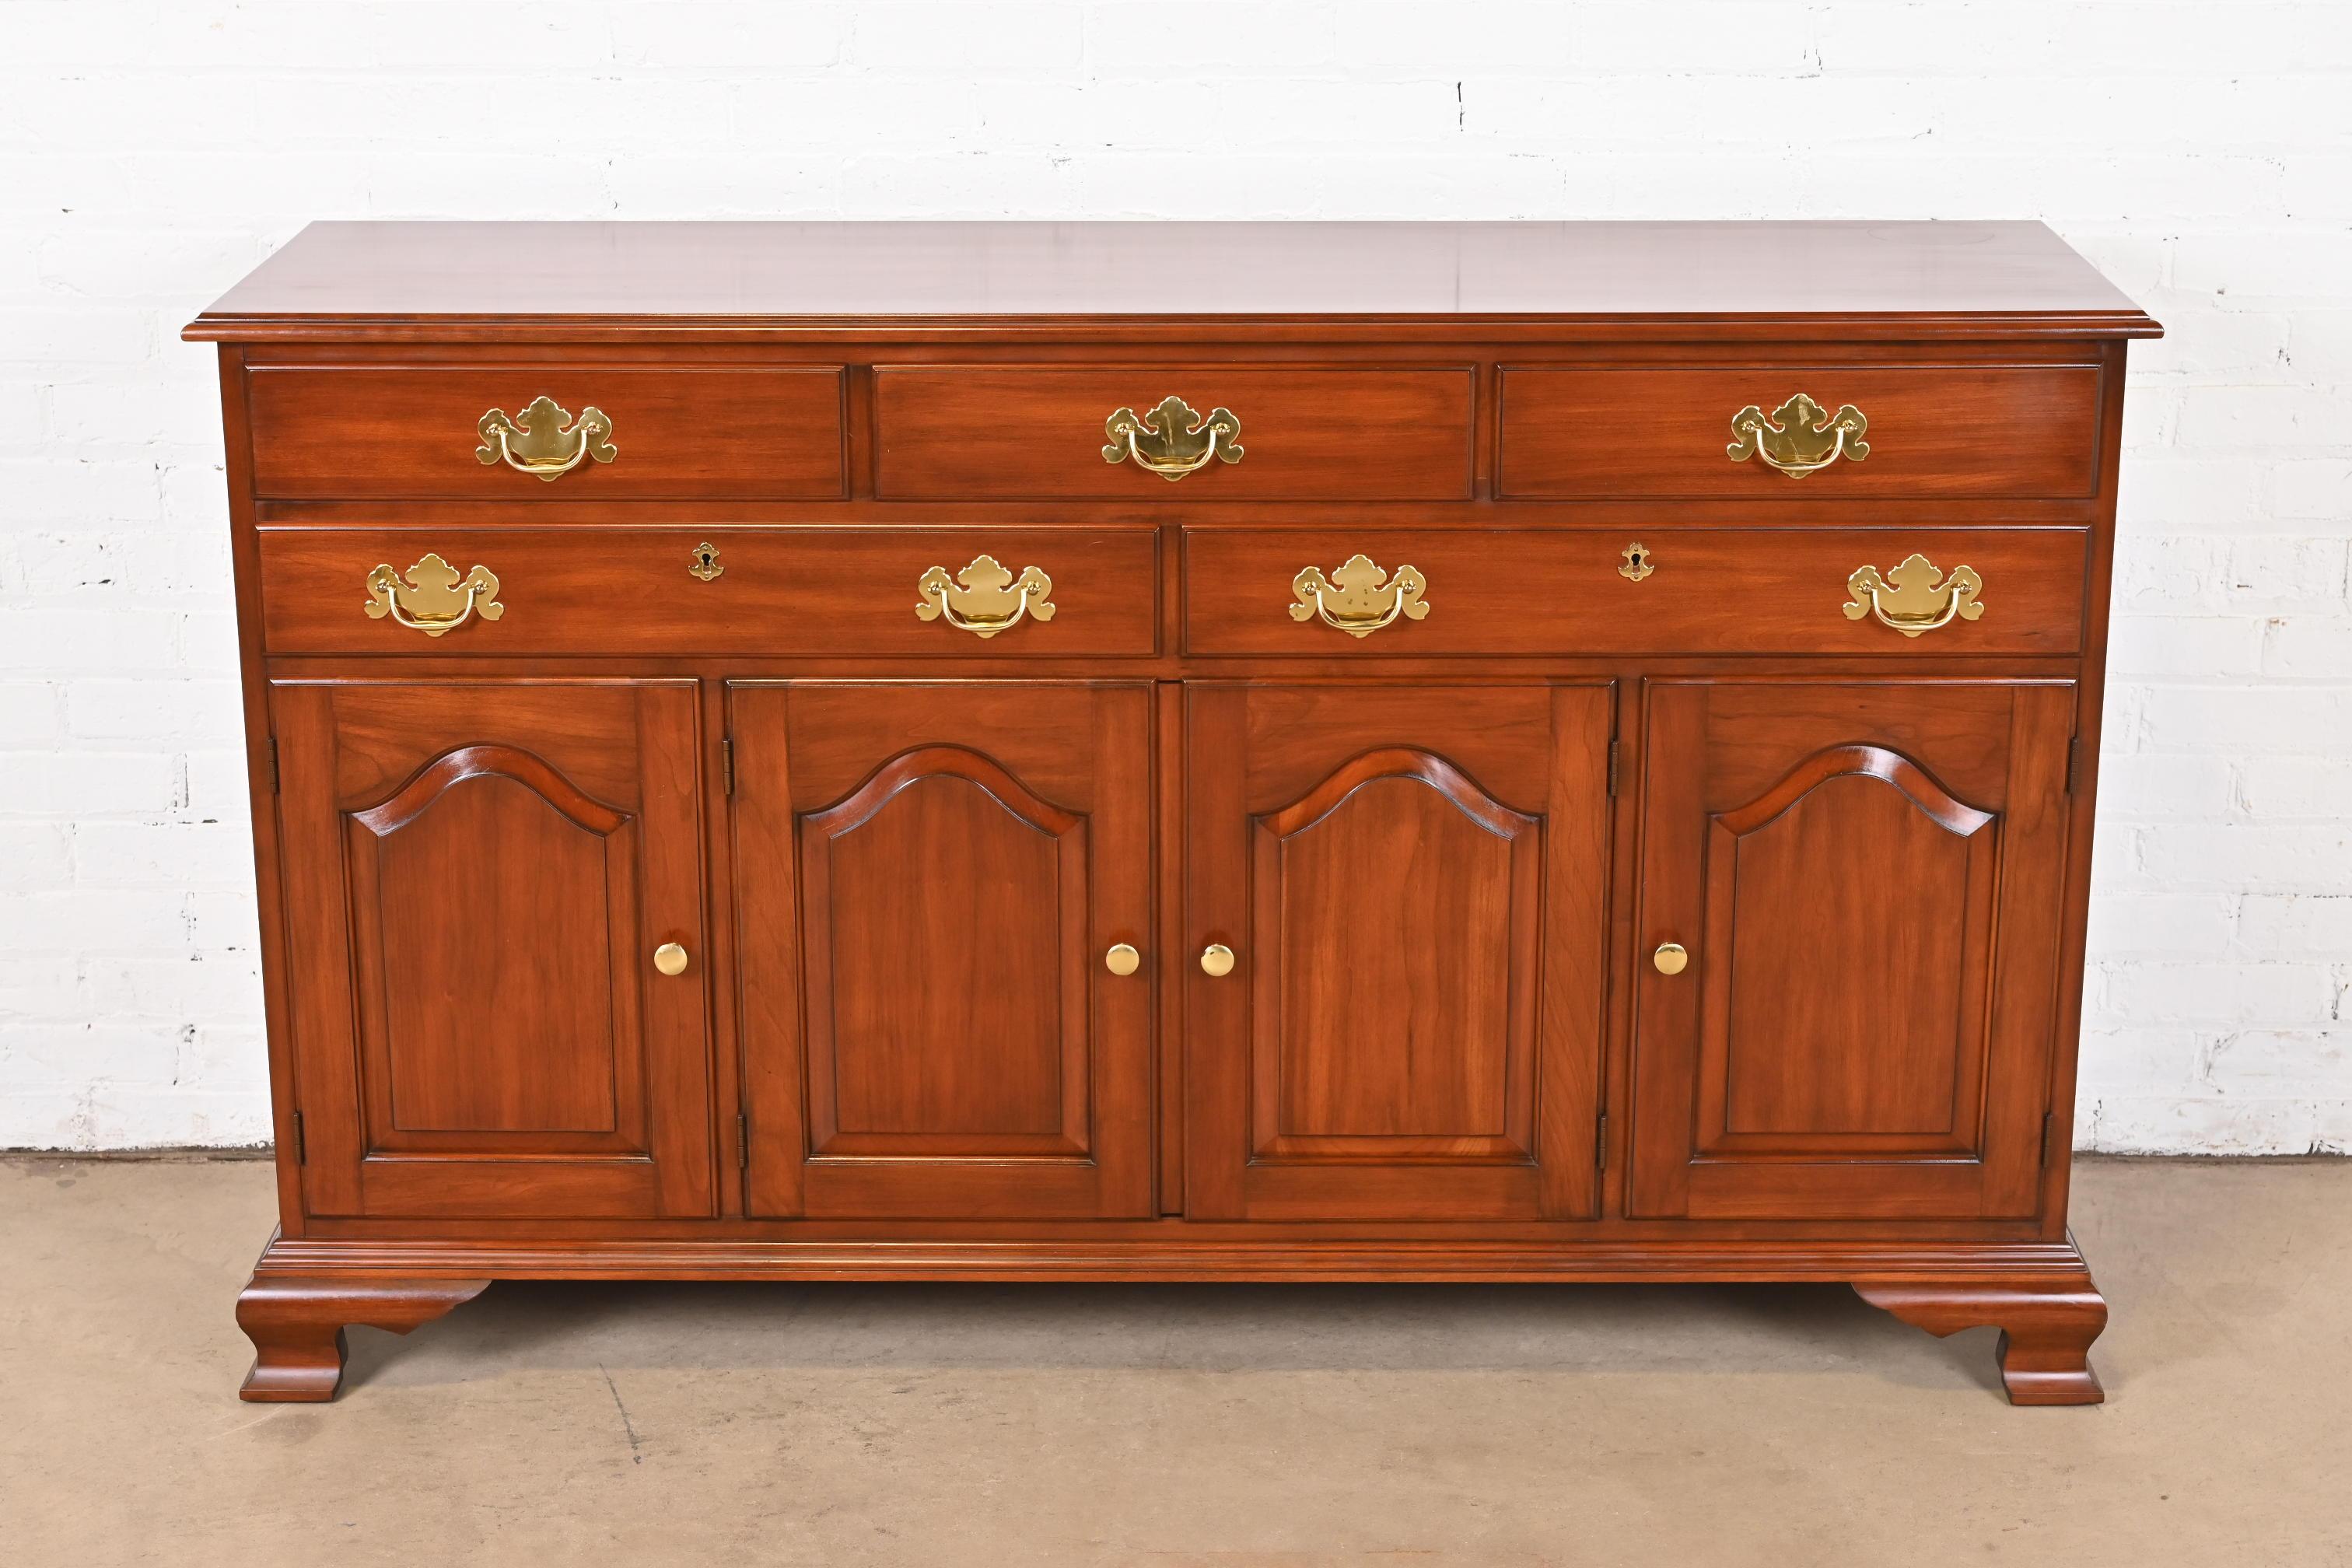 Henkel Harris American Colonial Cherry Wood Sideboard Buffet or Bar Cabinet In Good Condition For Sale In South Bend, IN